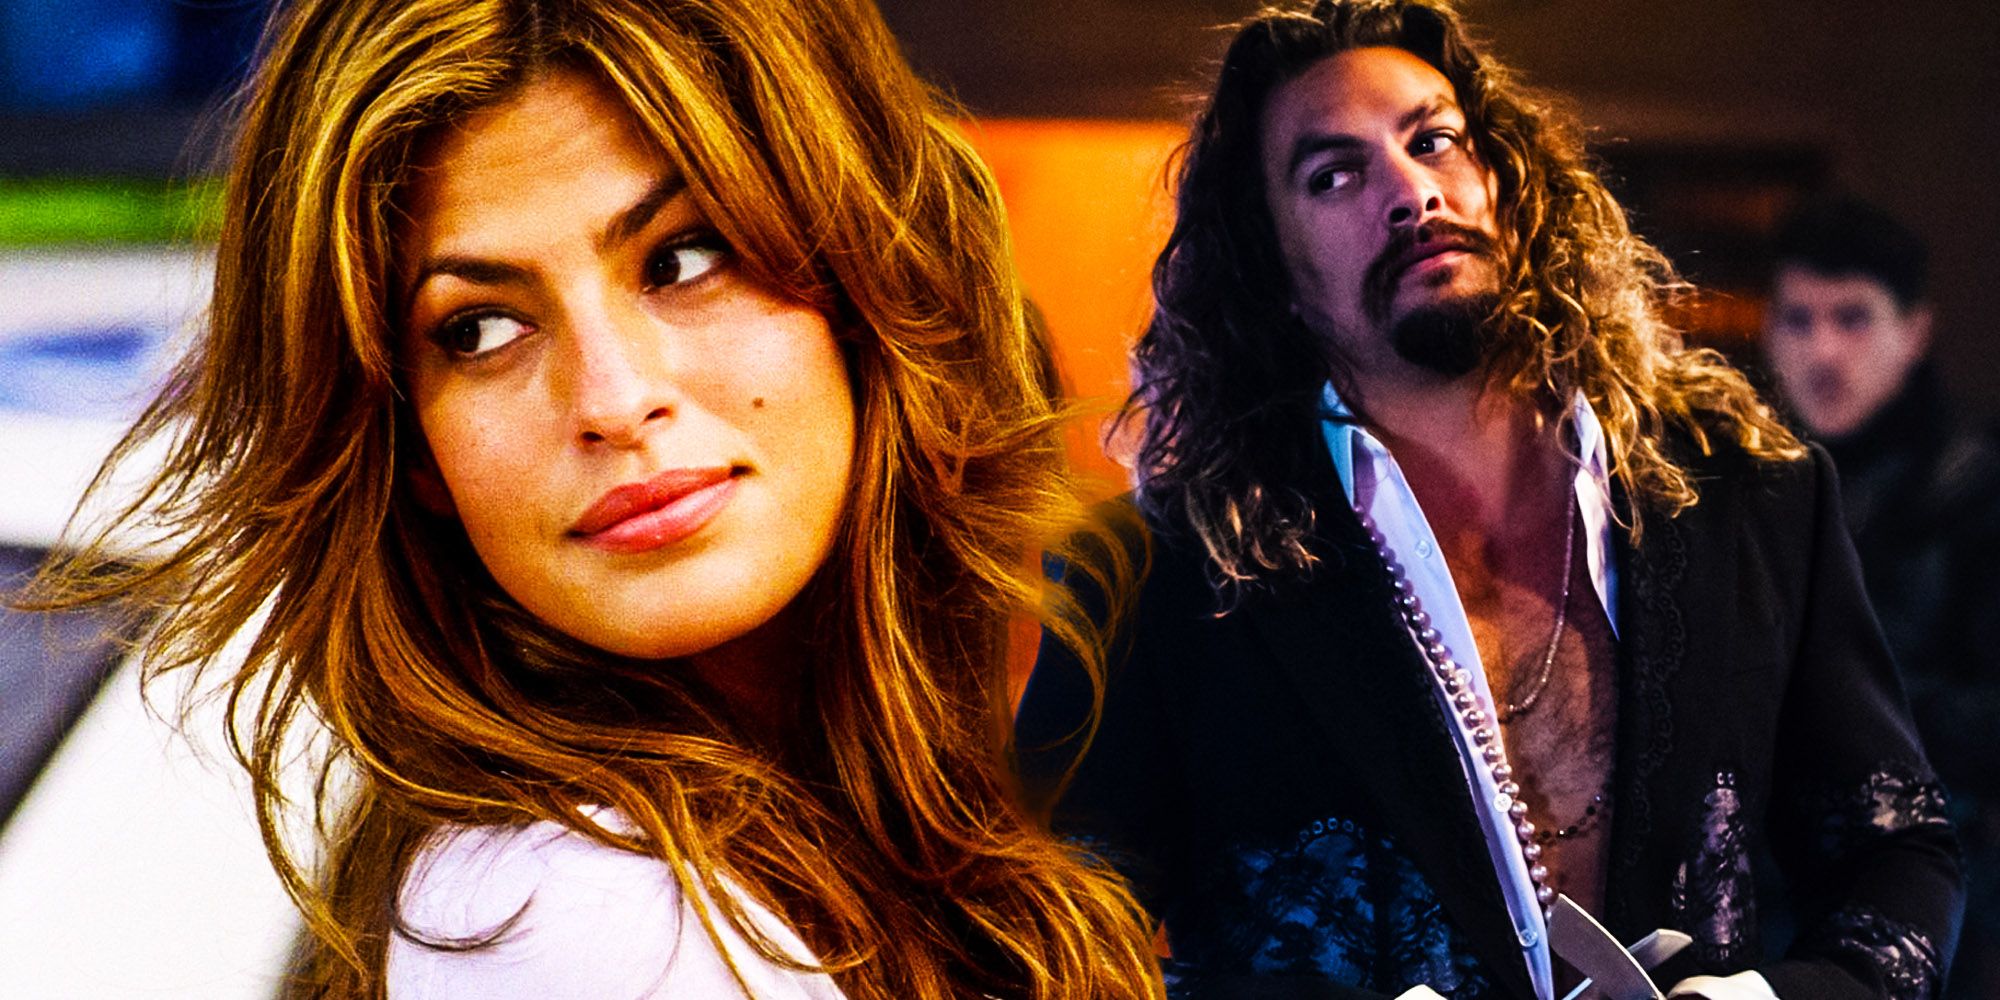 Eva Mendes as Monica in 2 Fast 2 Furious and Jason Momoa as Dante in Fast X